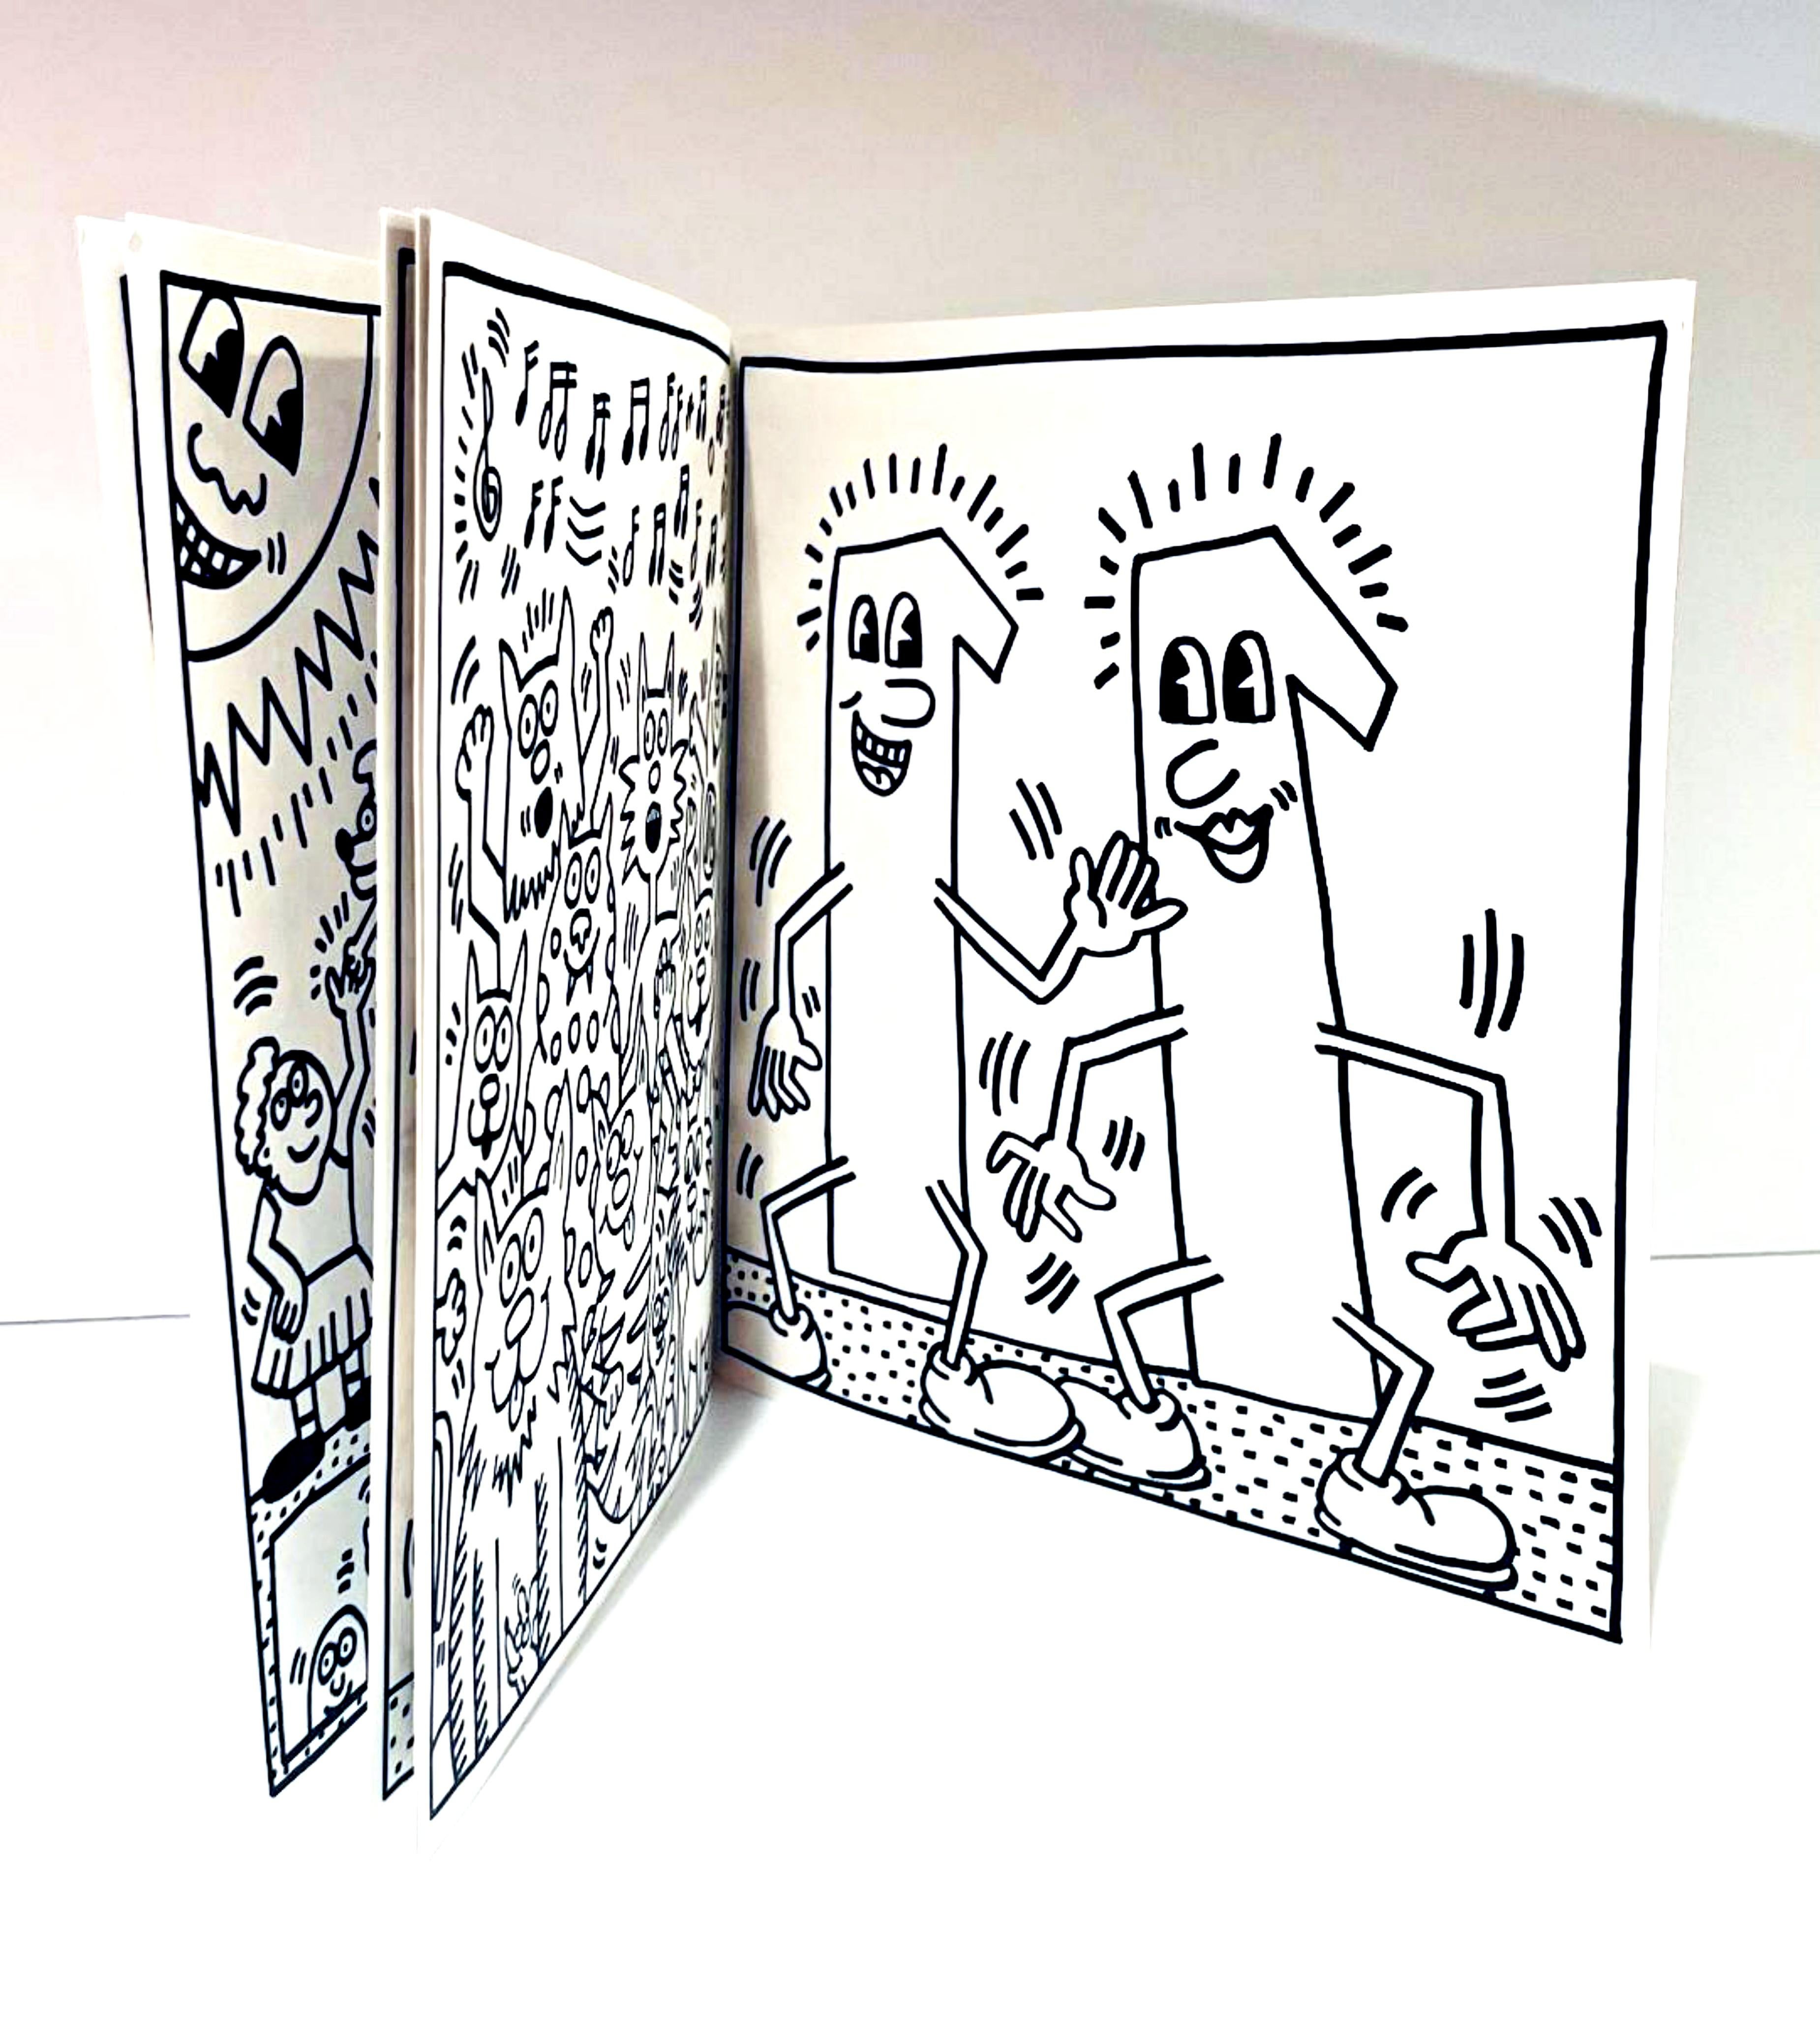 Limited Edition Coloring Book (Artist Book of 20 Bound Offset Lithographs), 1985 For Sale 4